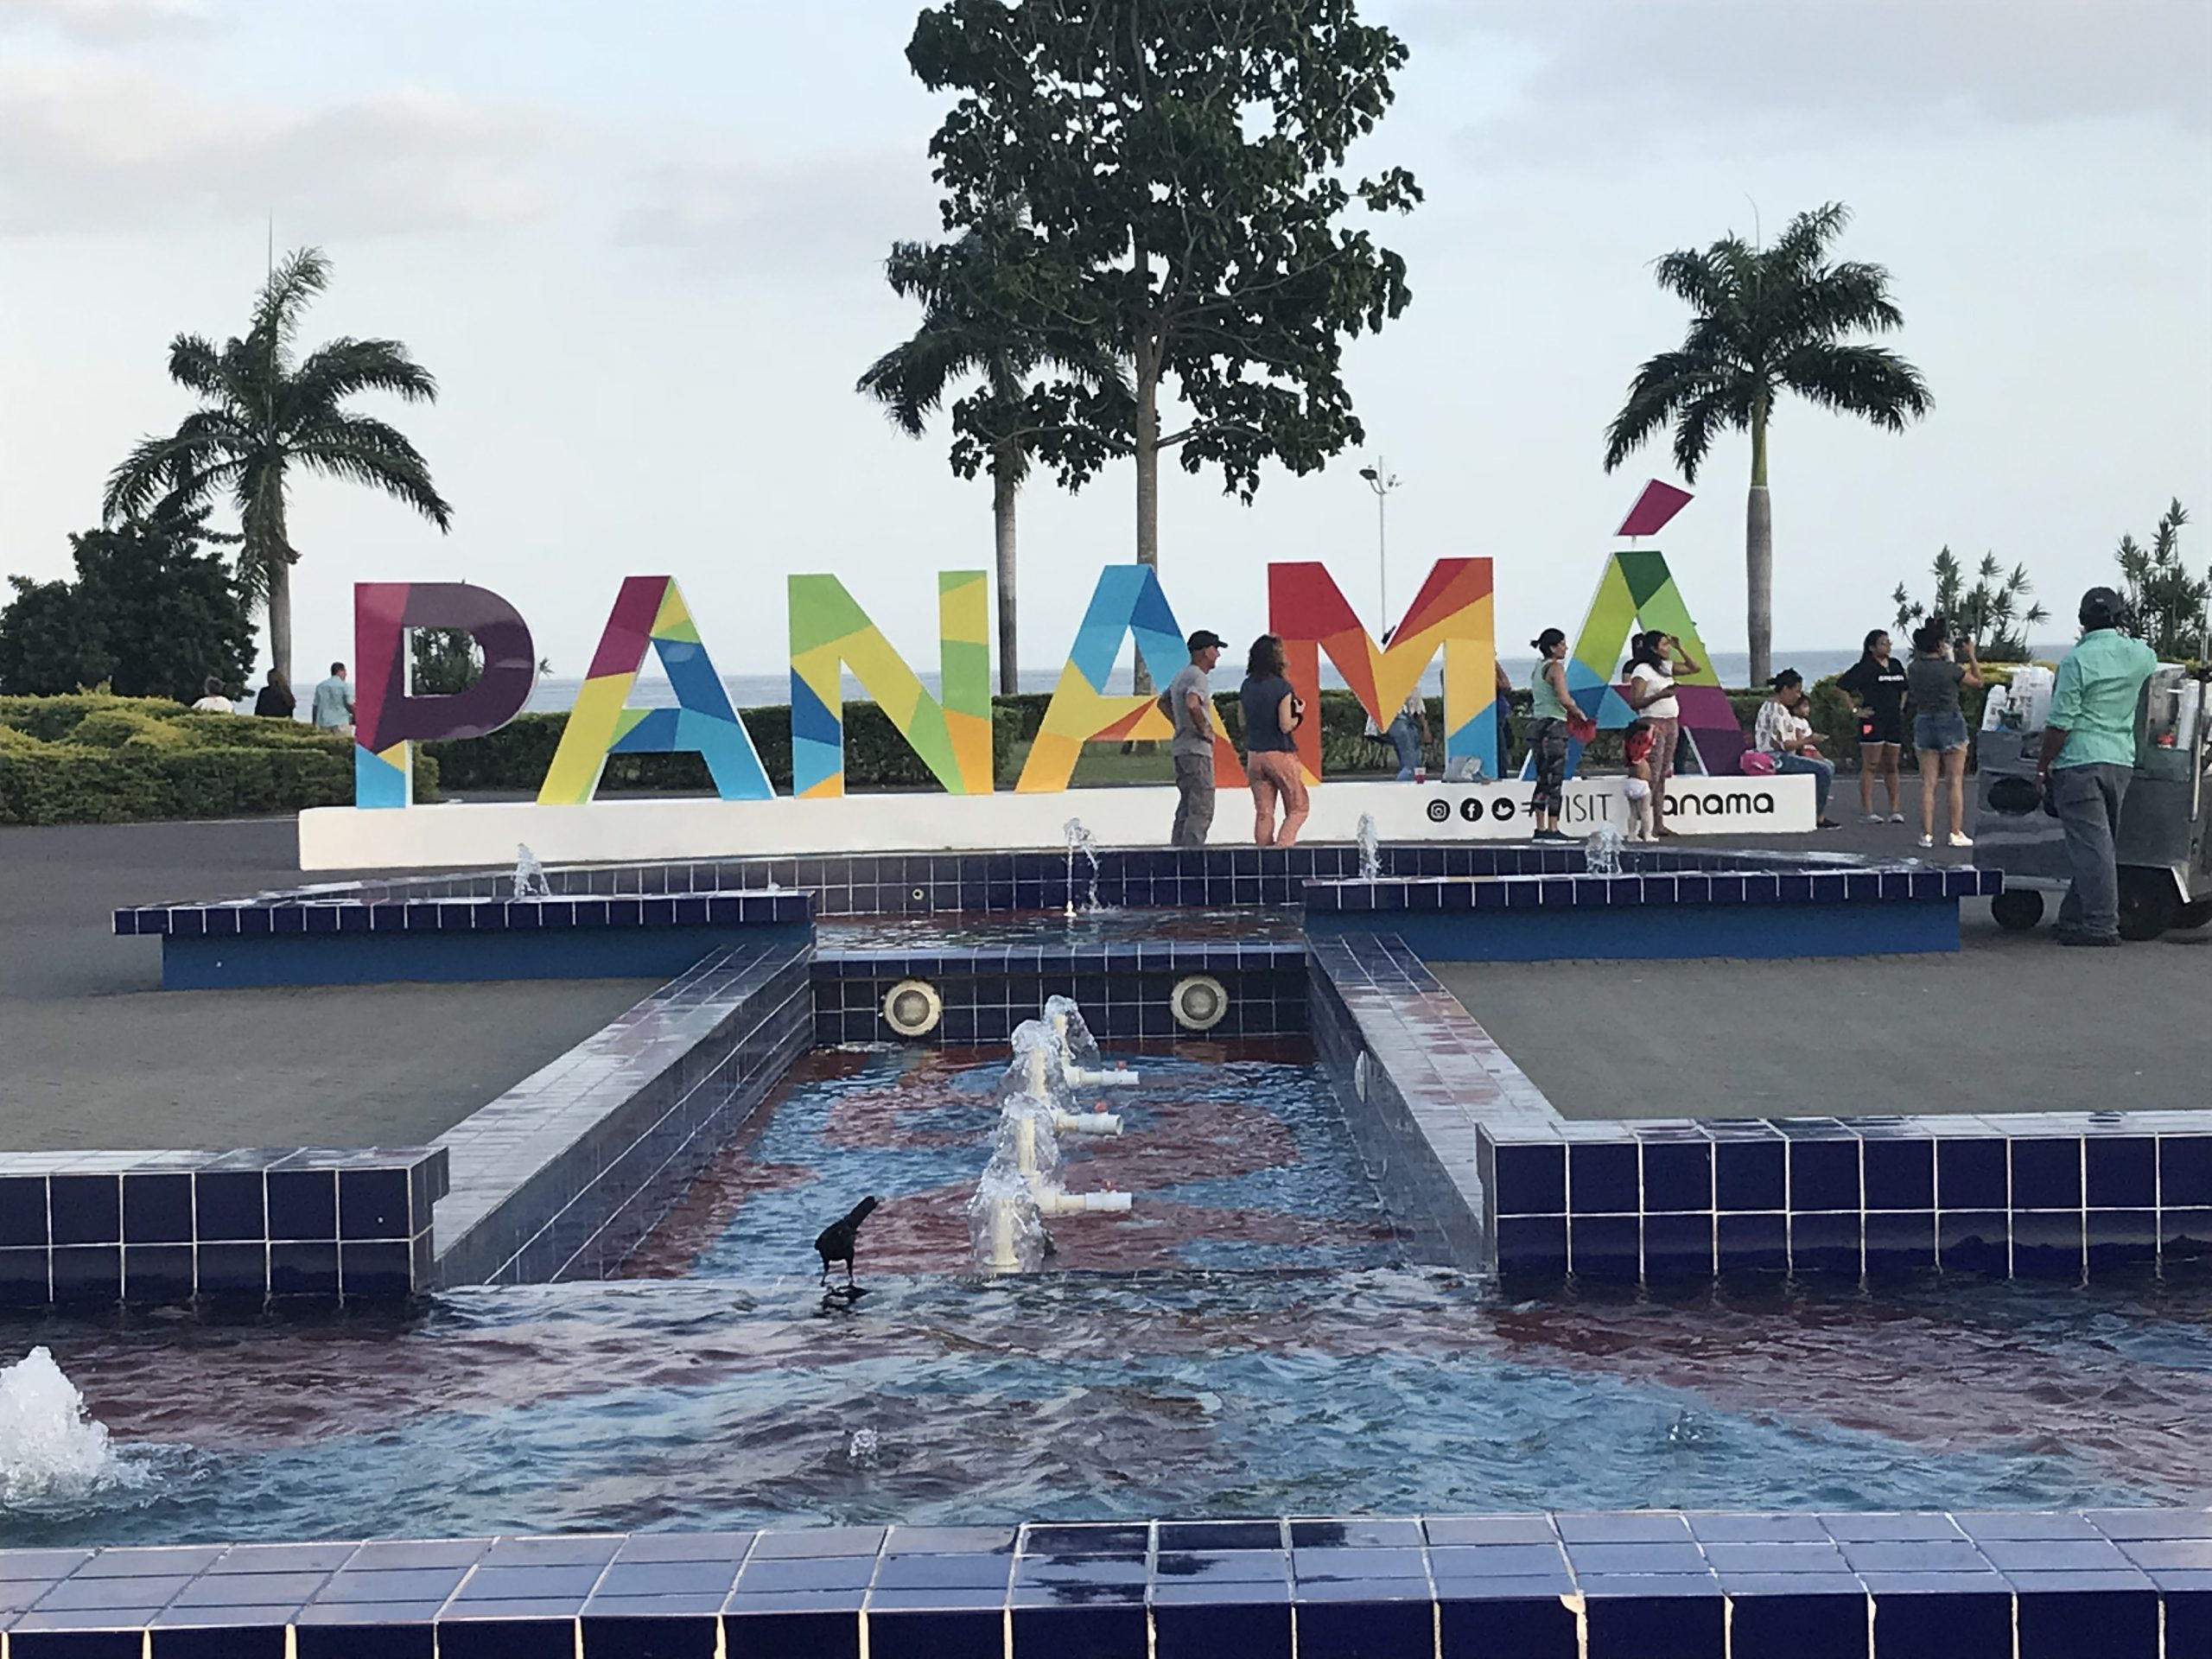 Panama🇵🇦 Travel Vlog! I went to Panama for Carnival and it was nothing like I expected!